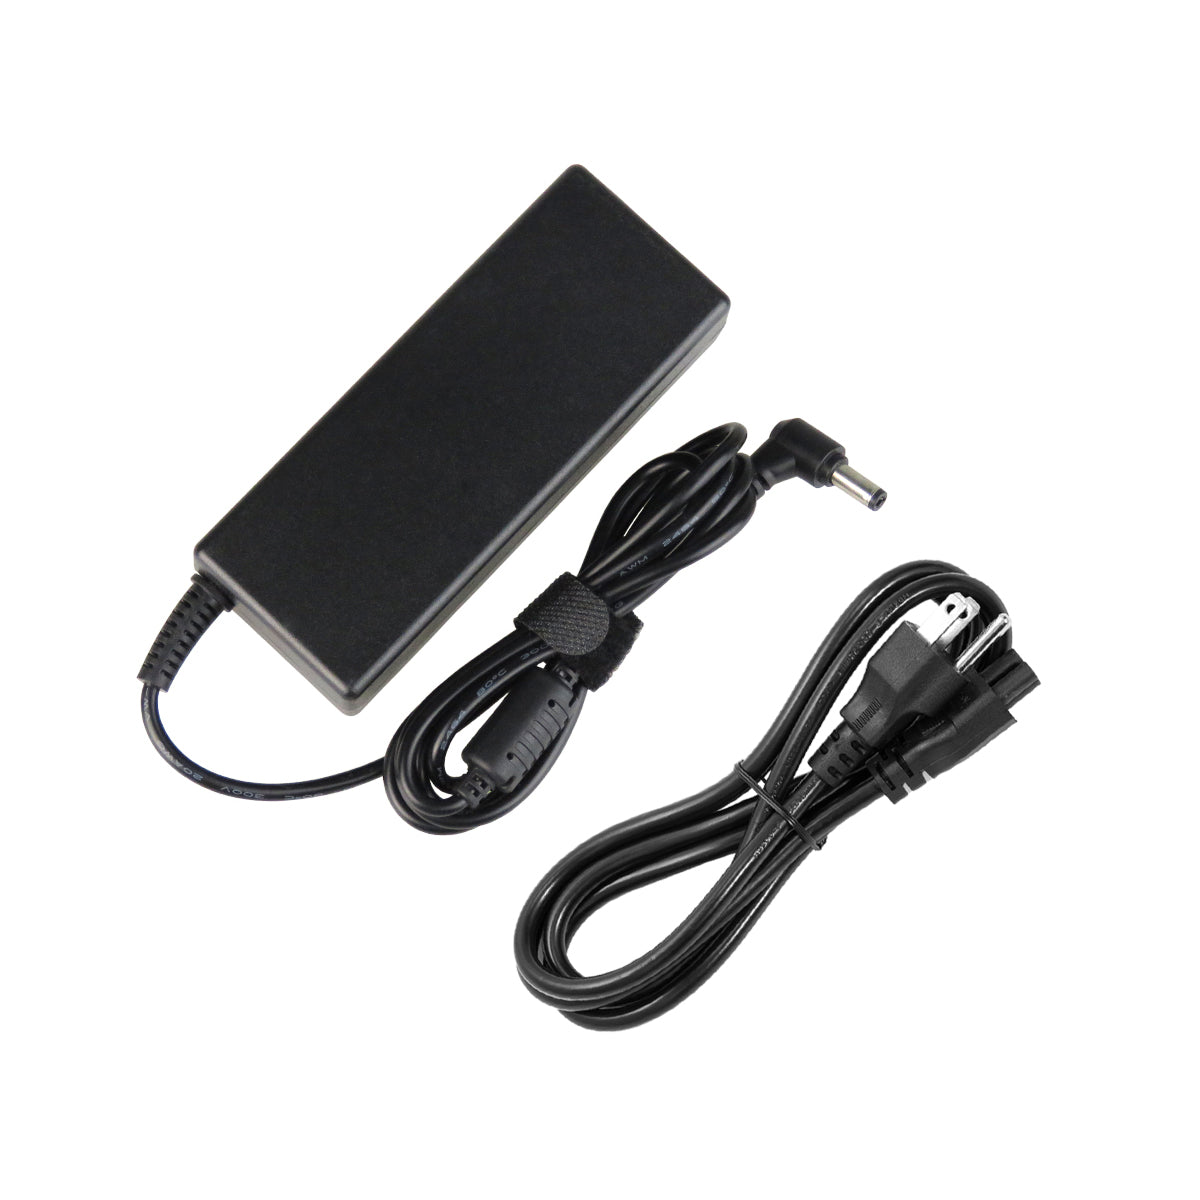 AC Adapter Charger for ASUS G53SX Notebook.